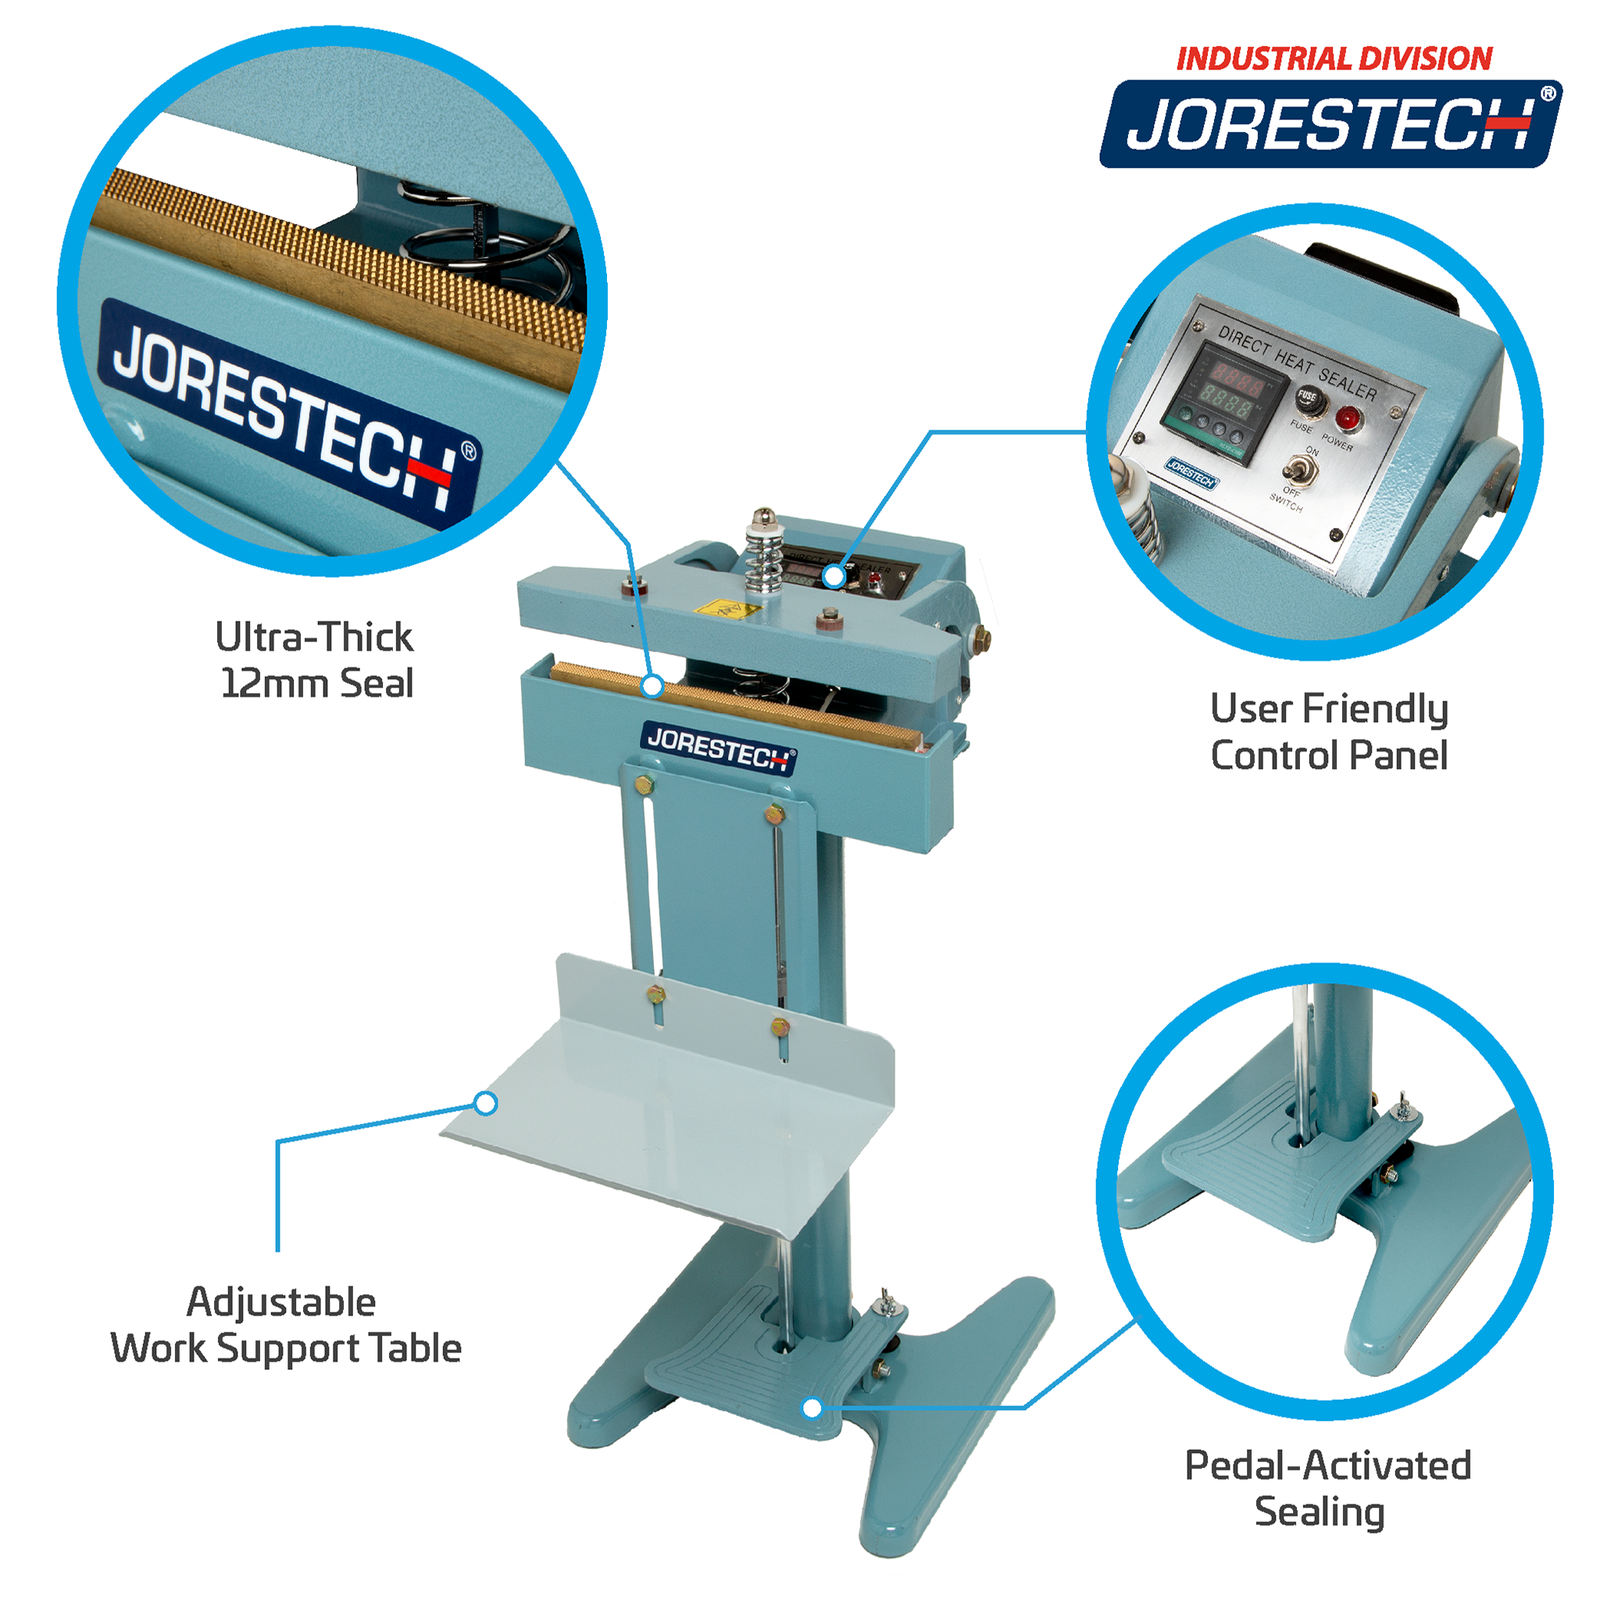 Infographic shows blue JORES TECHNOLOGIES® constant foot impulse bag sealer with text that reads: Constant Heat Sealing System, User Friendly Control Panel, Adjustable Work Support Table, and Pedal-Activated Sealing